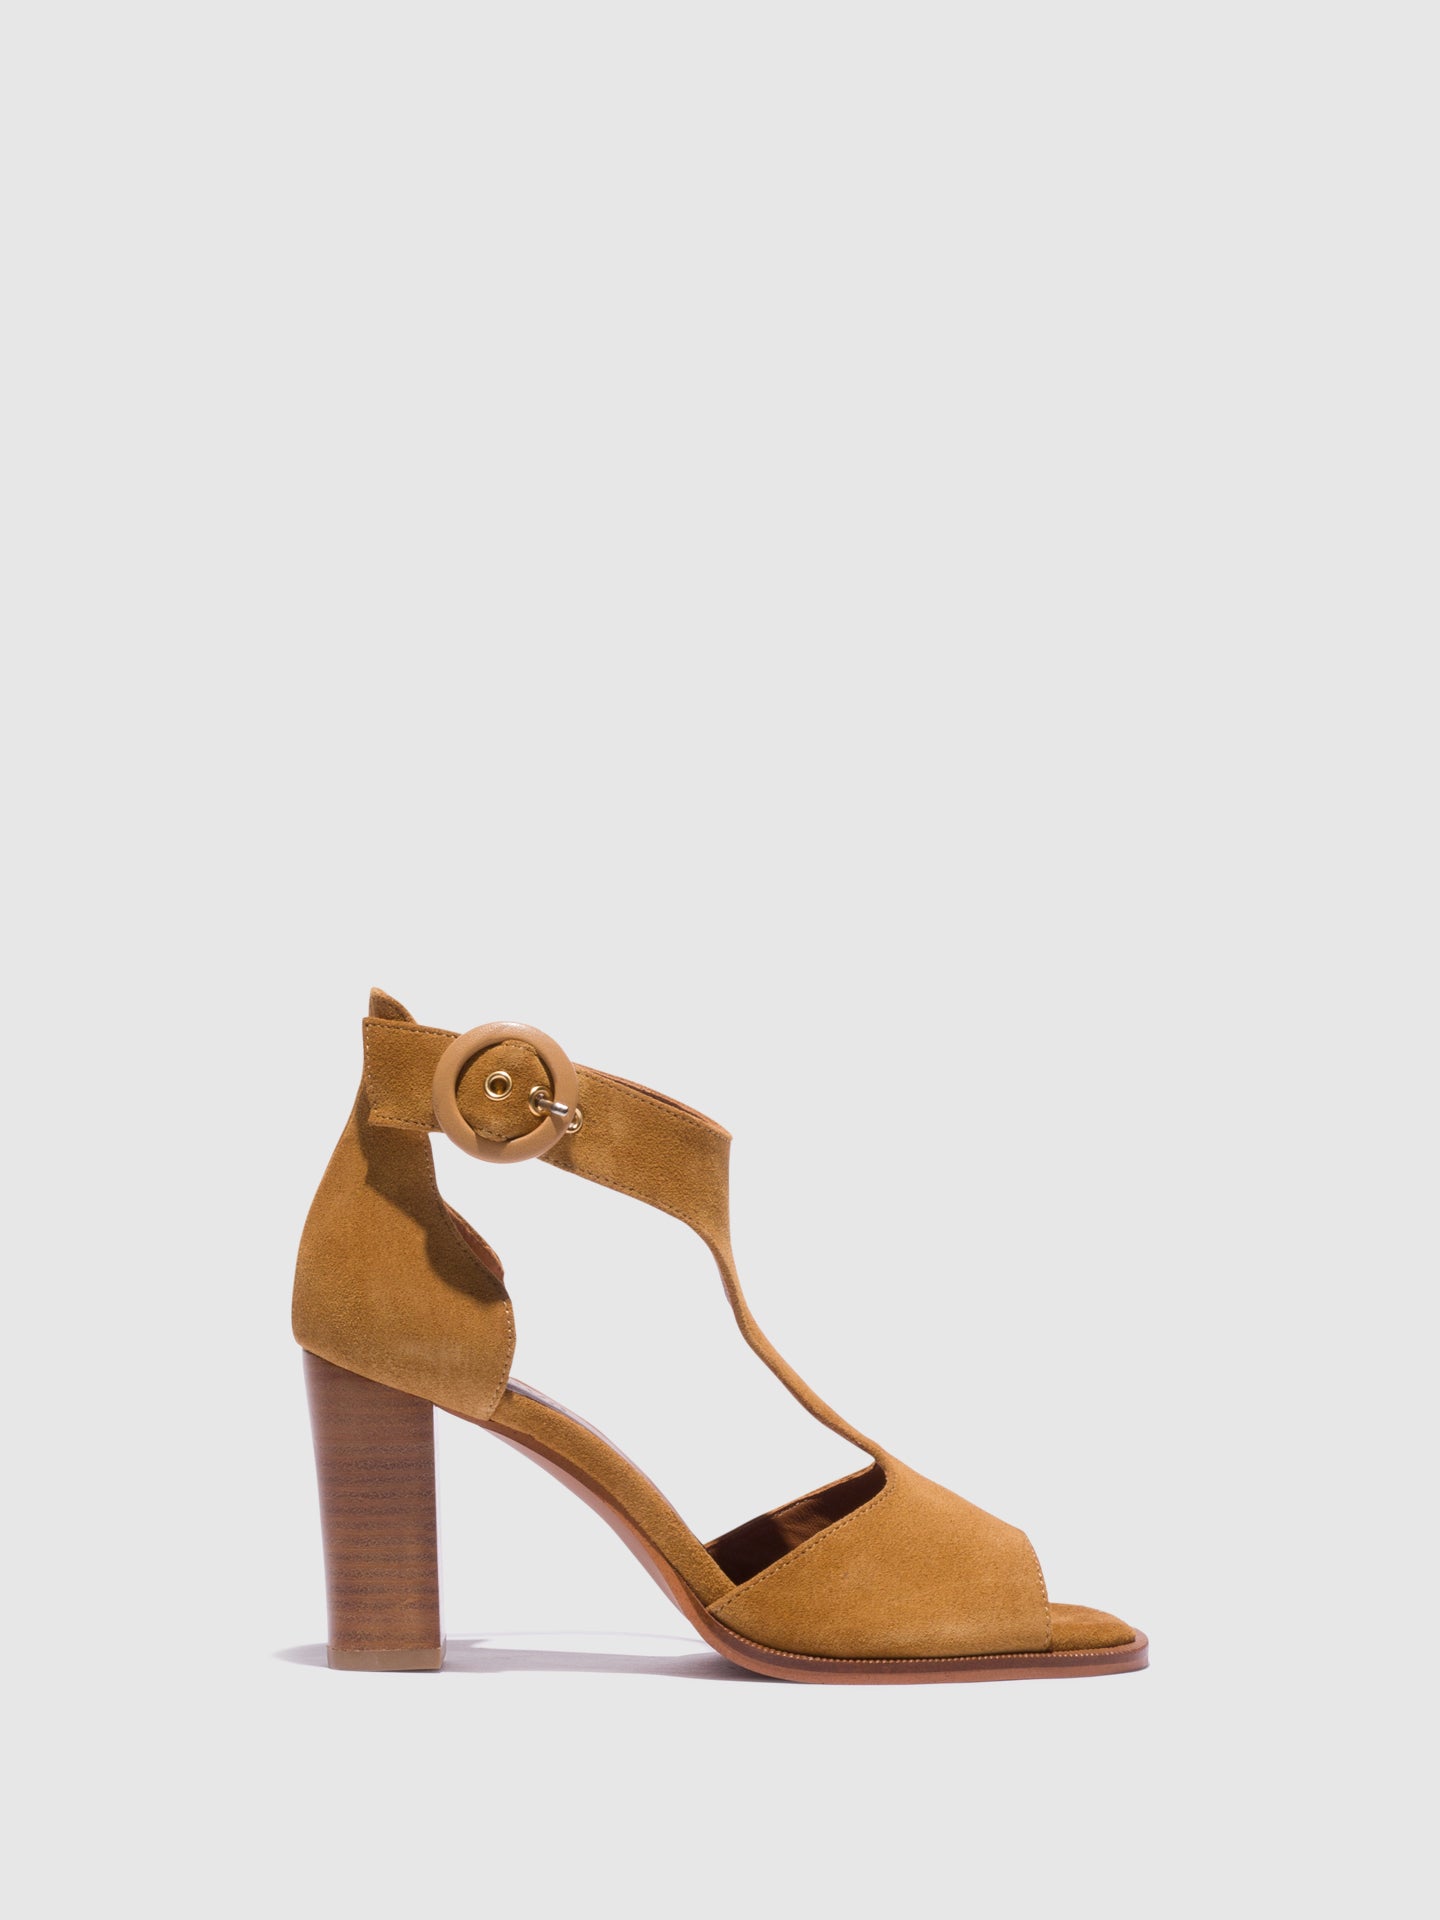 Foreva Brown Ankle Strap Sandals